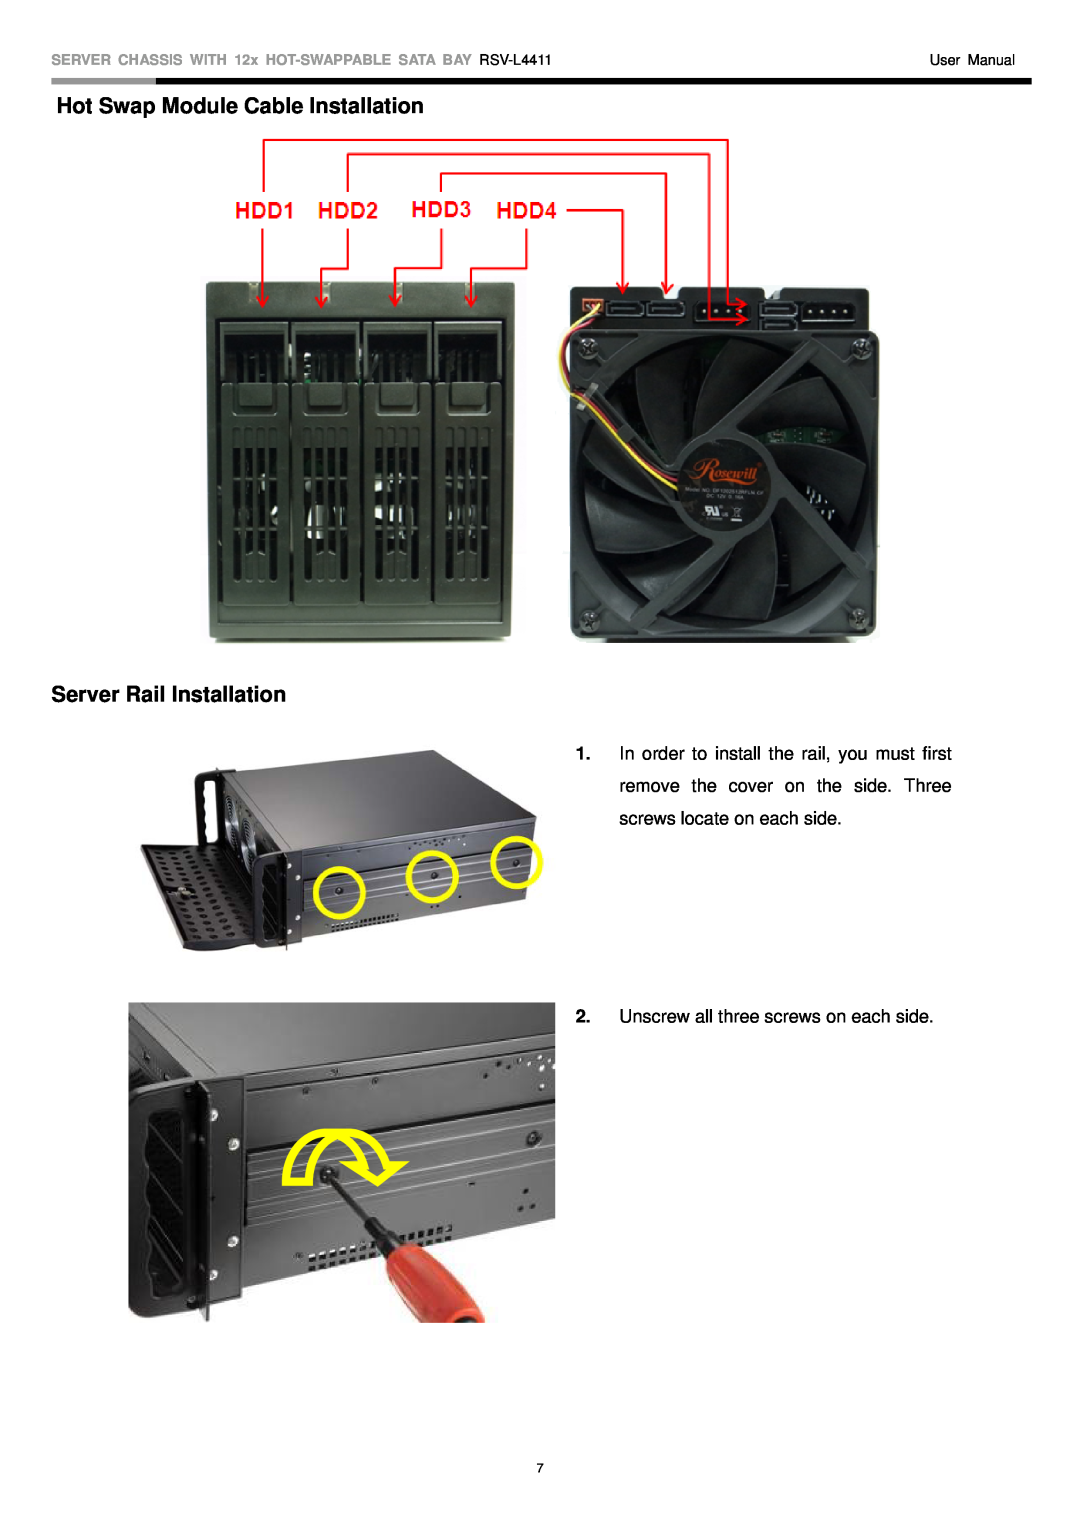 Rosewill RSV-L4411 Hot Swap Module Cable Installation Server Rail Installation, Unscrew all three screws on each side 